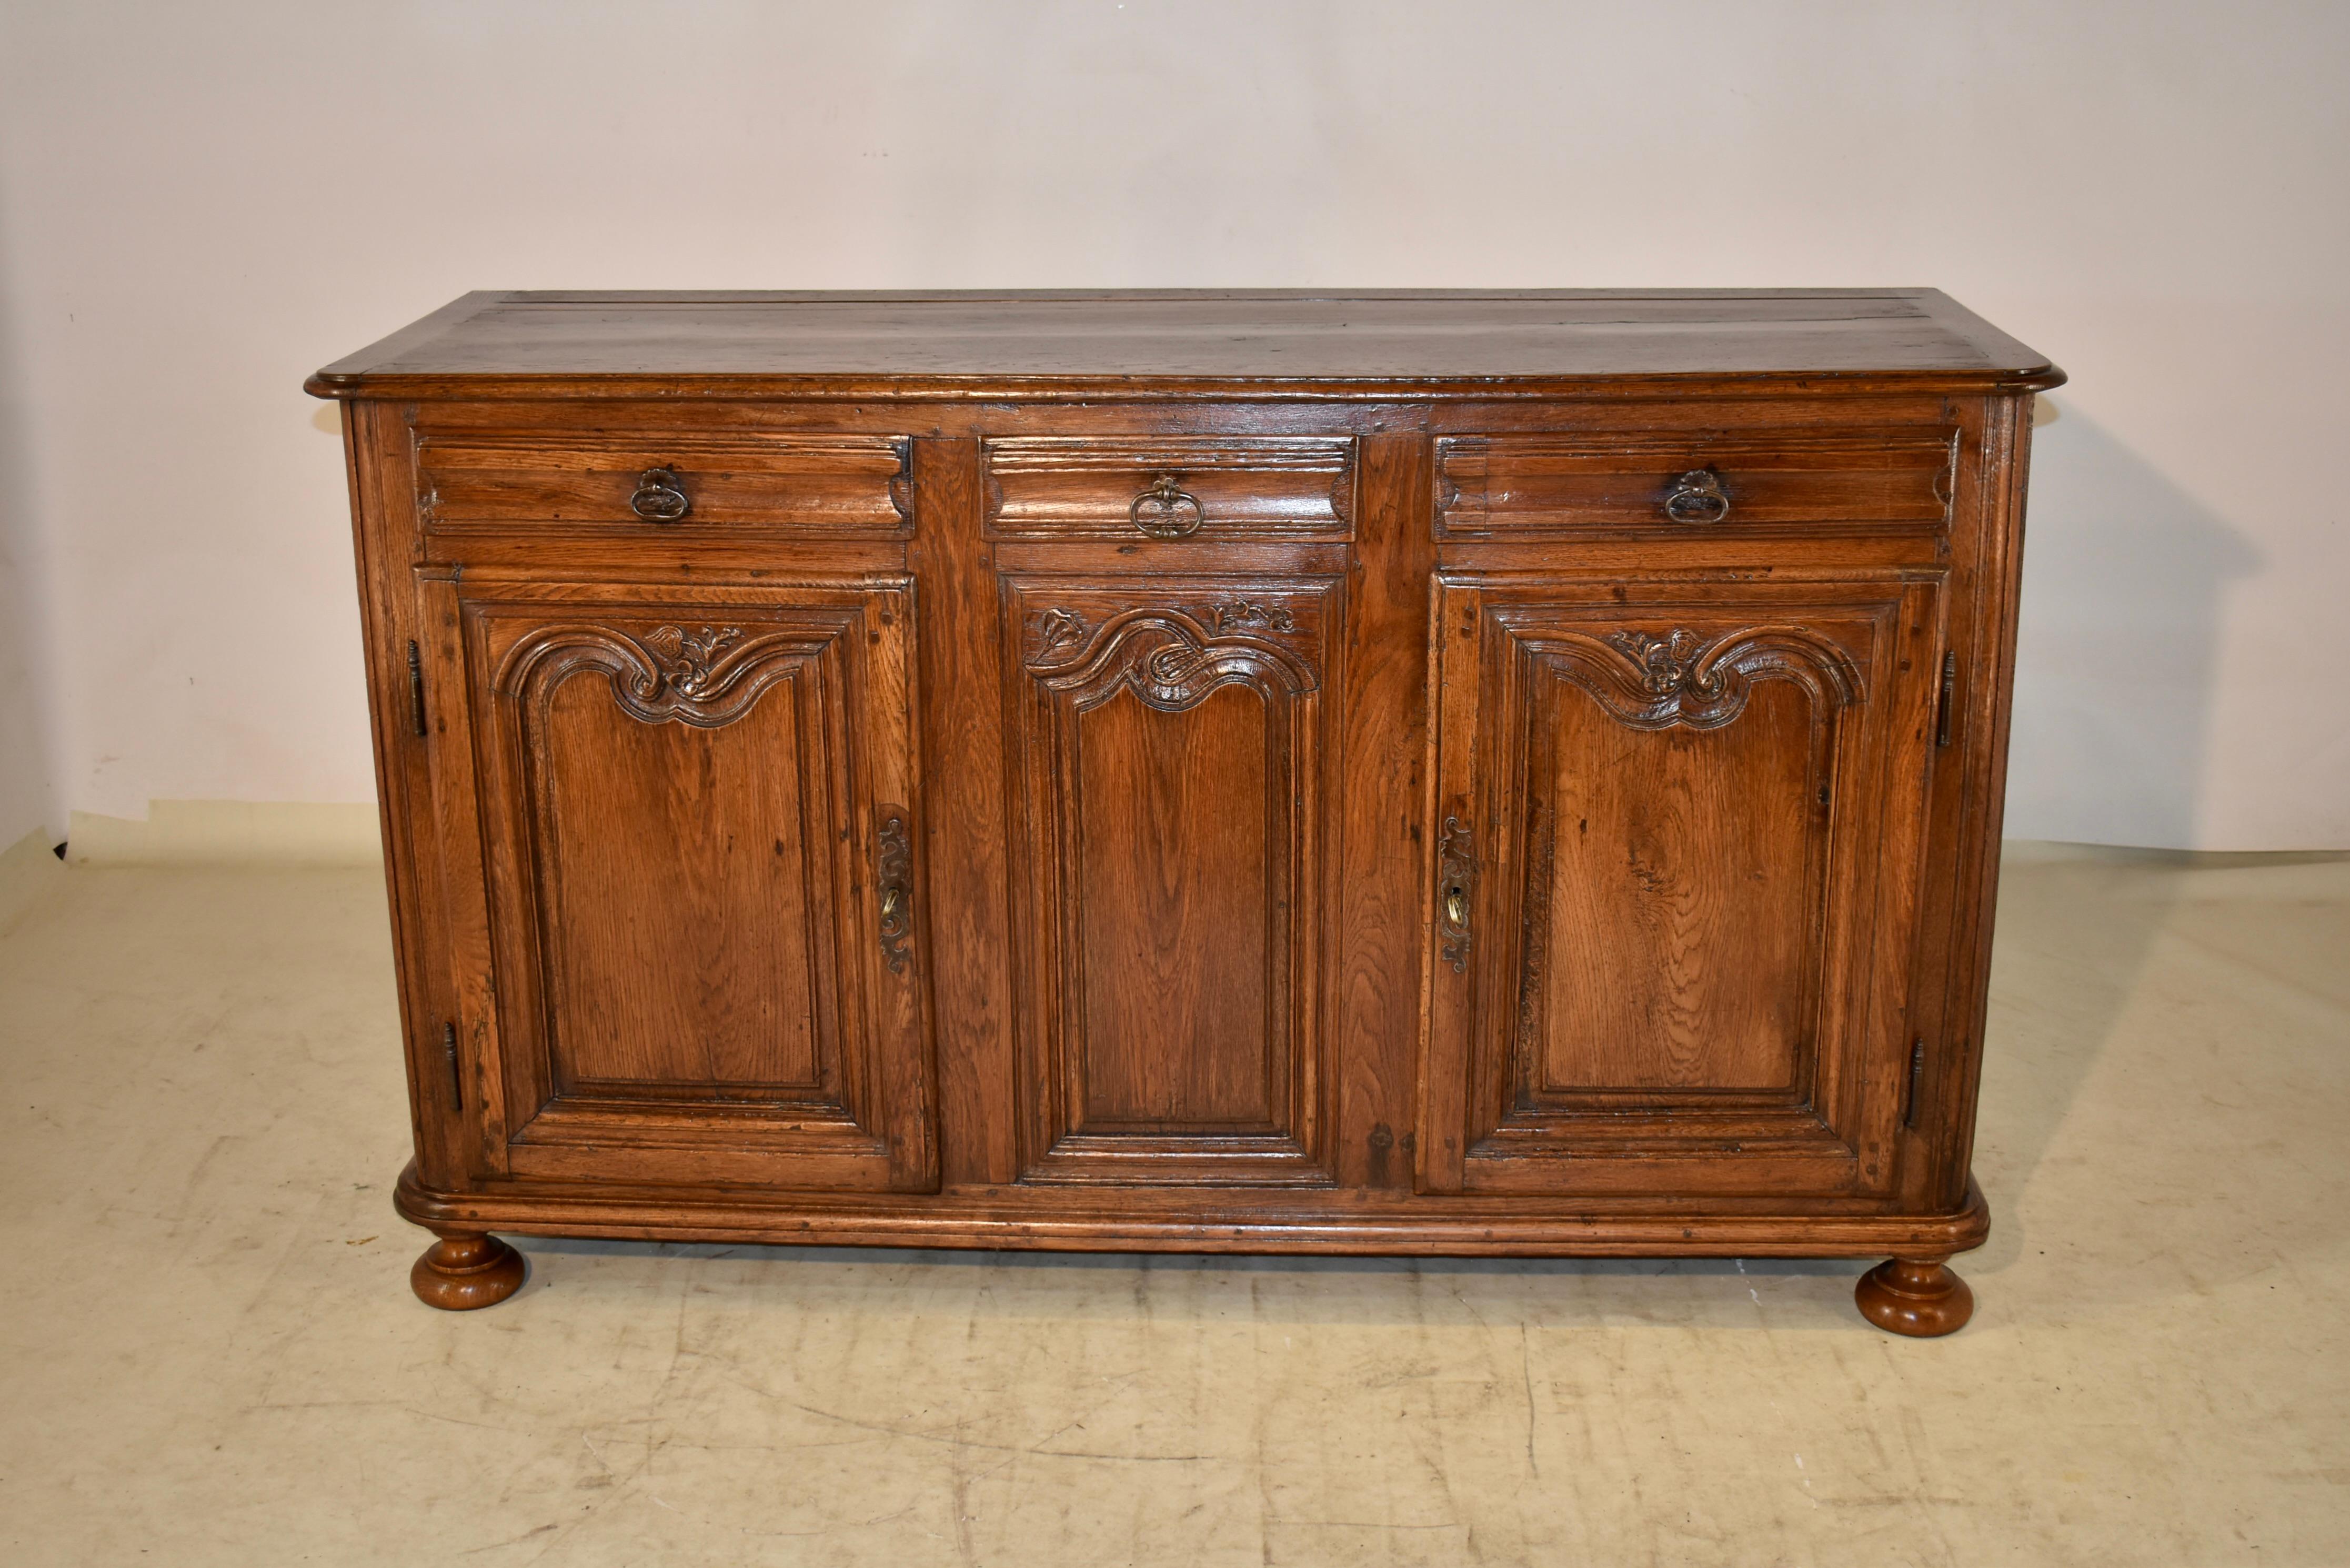 18th century Oak enfilade from France. The top is banded and has a beveled edge and plate groove toward the back of the top. The top follows down to fabulous two paneled sides and three drawers with hand carved drawer fronts in the front of the